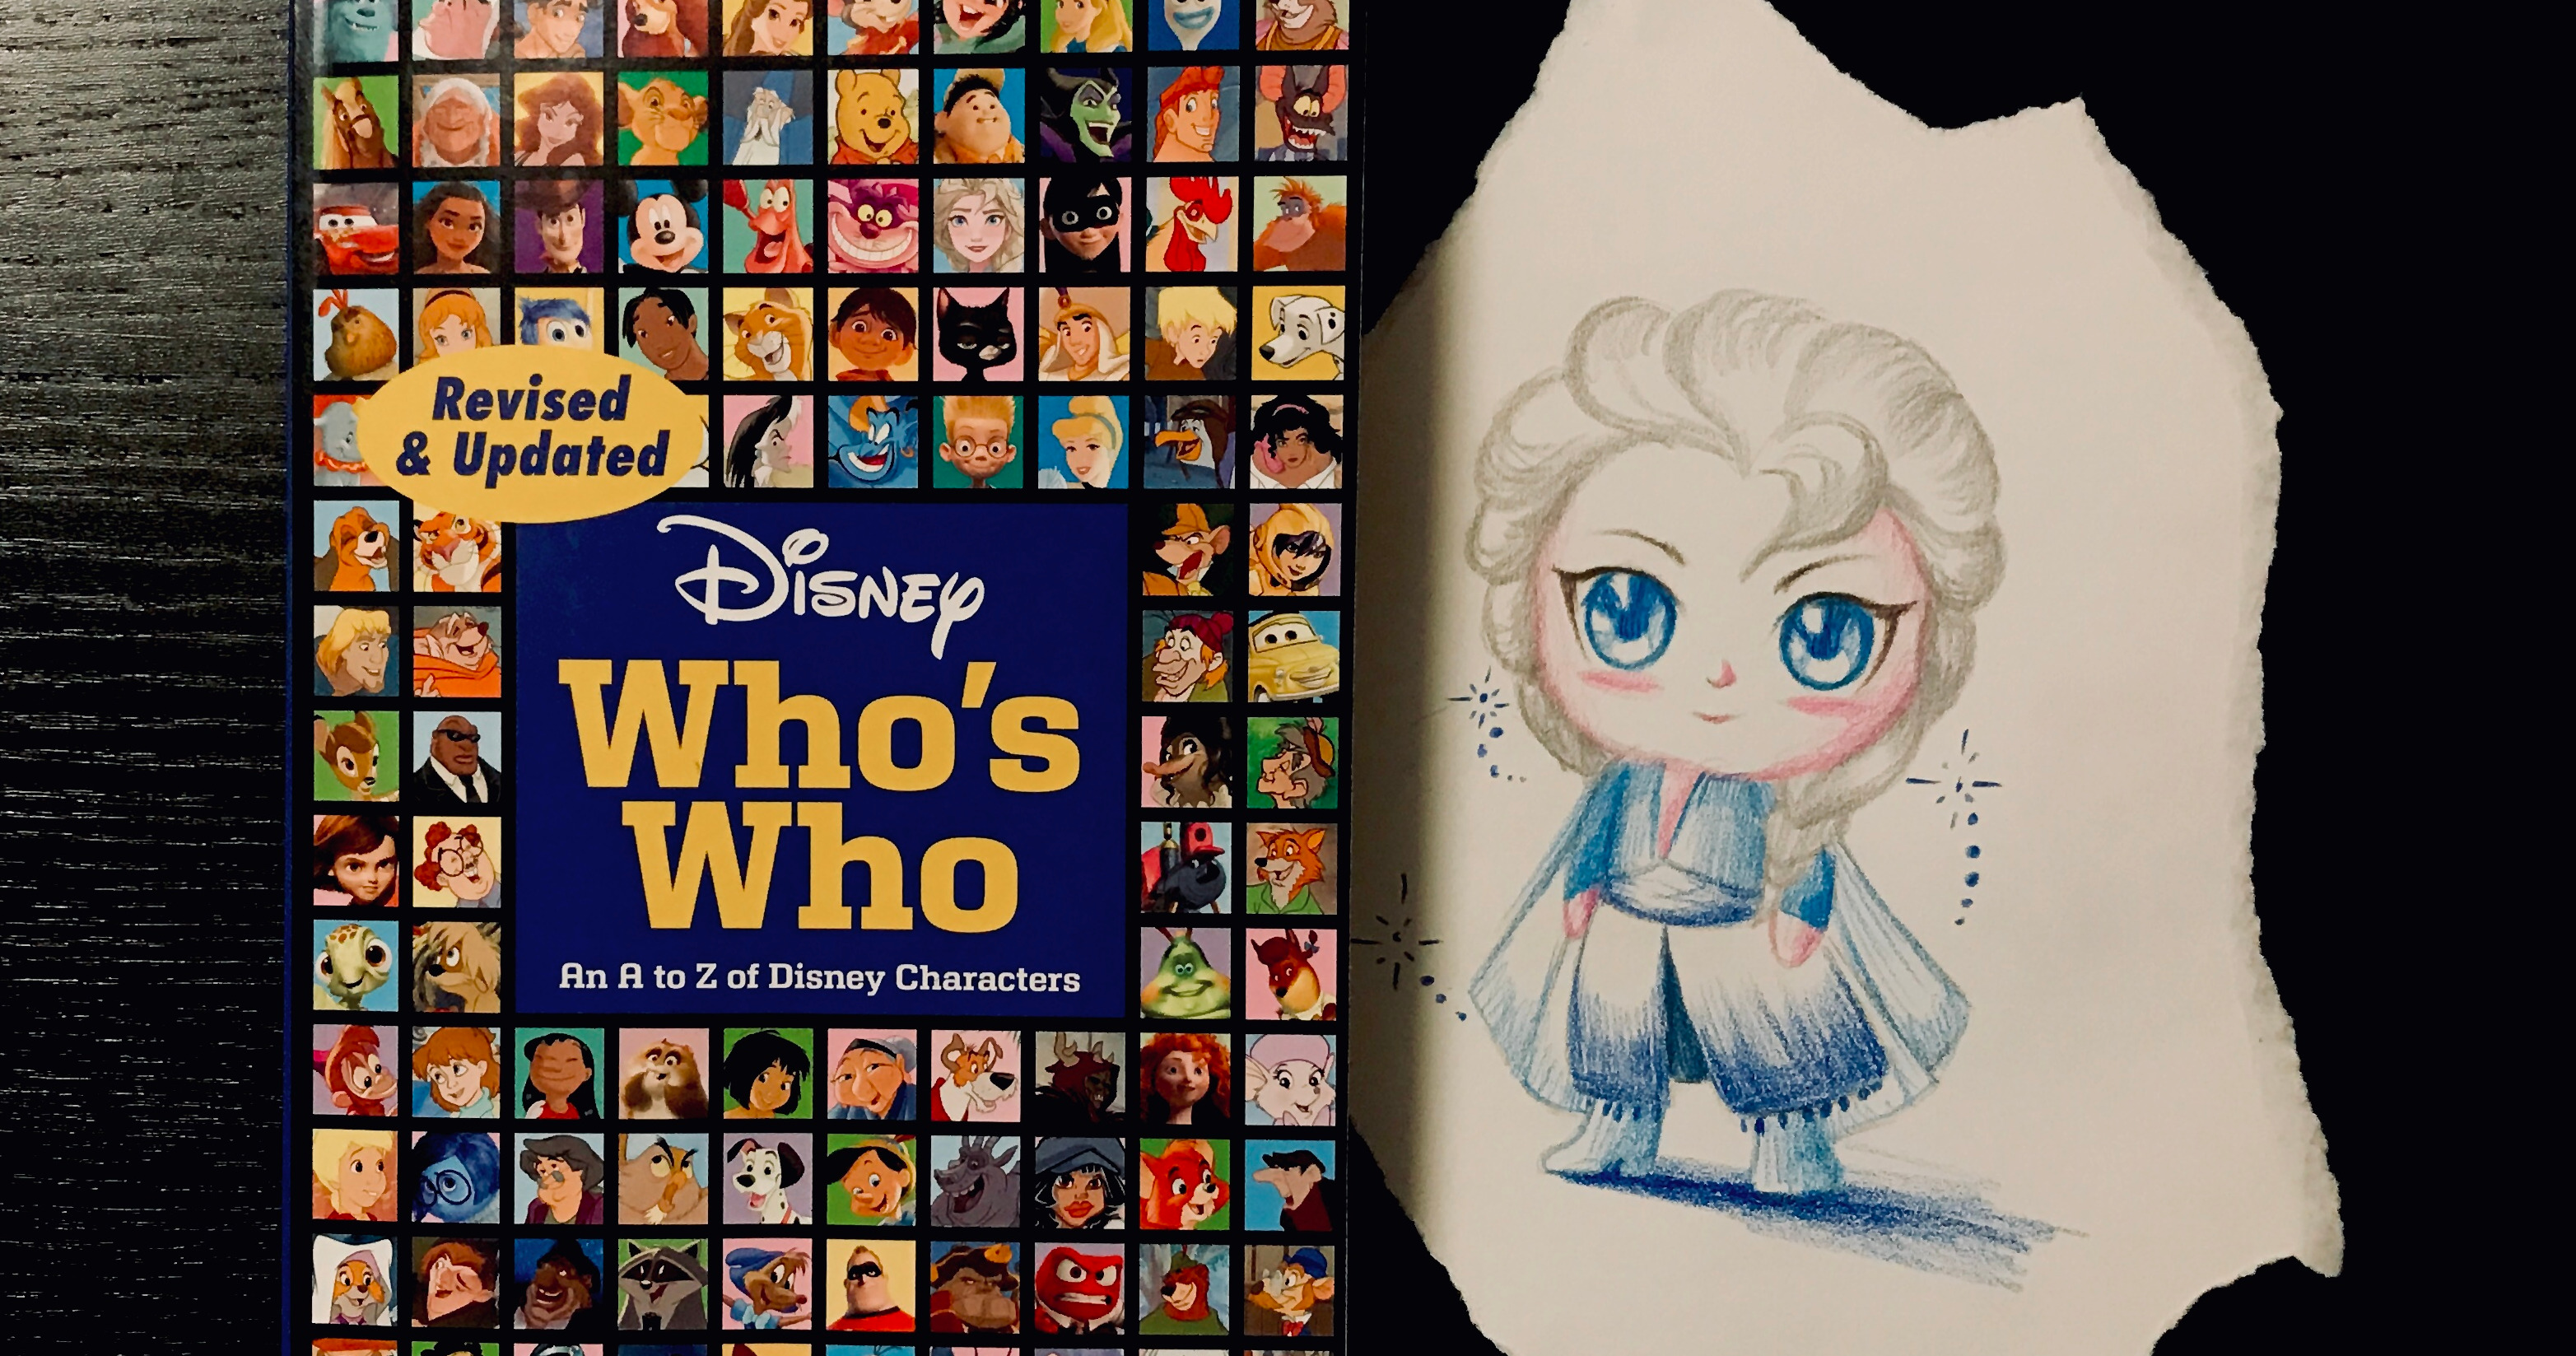 Disney Who's Who: an a to Z of Disney Characters